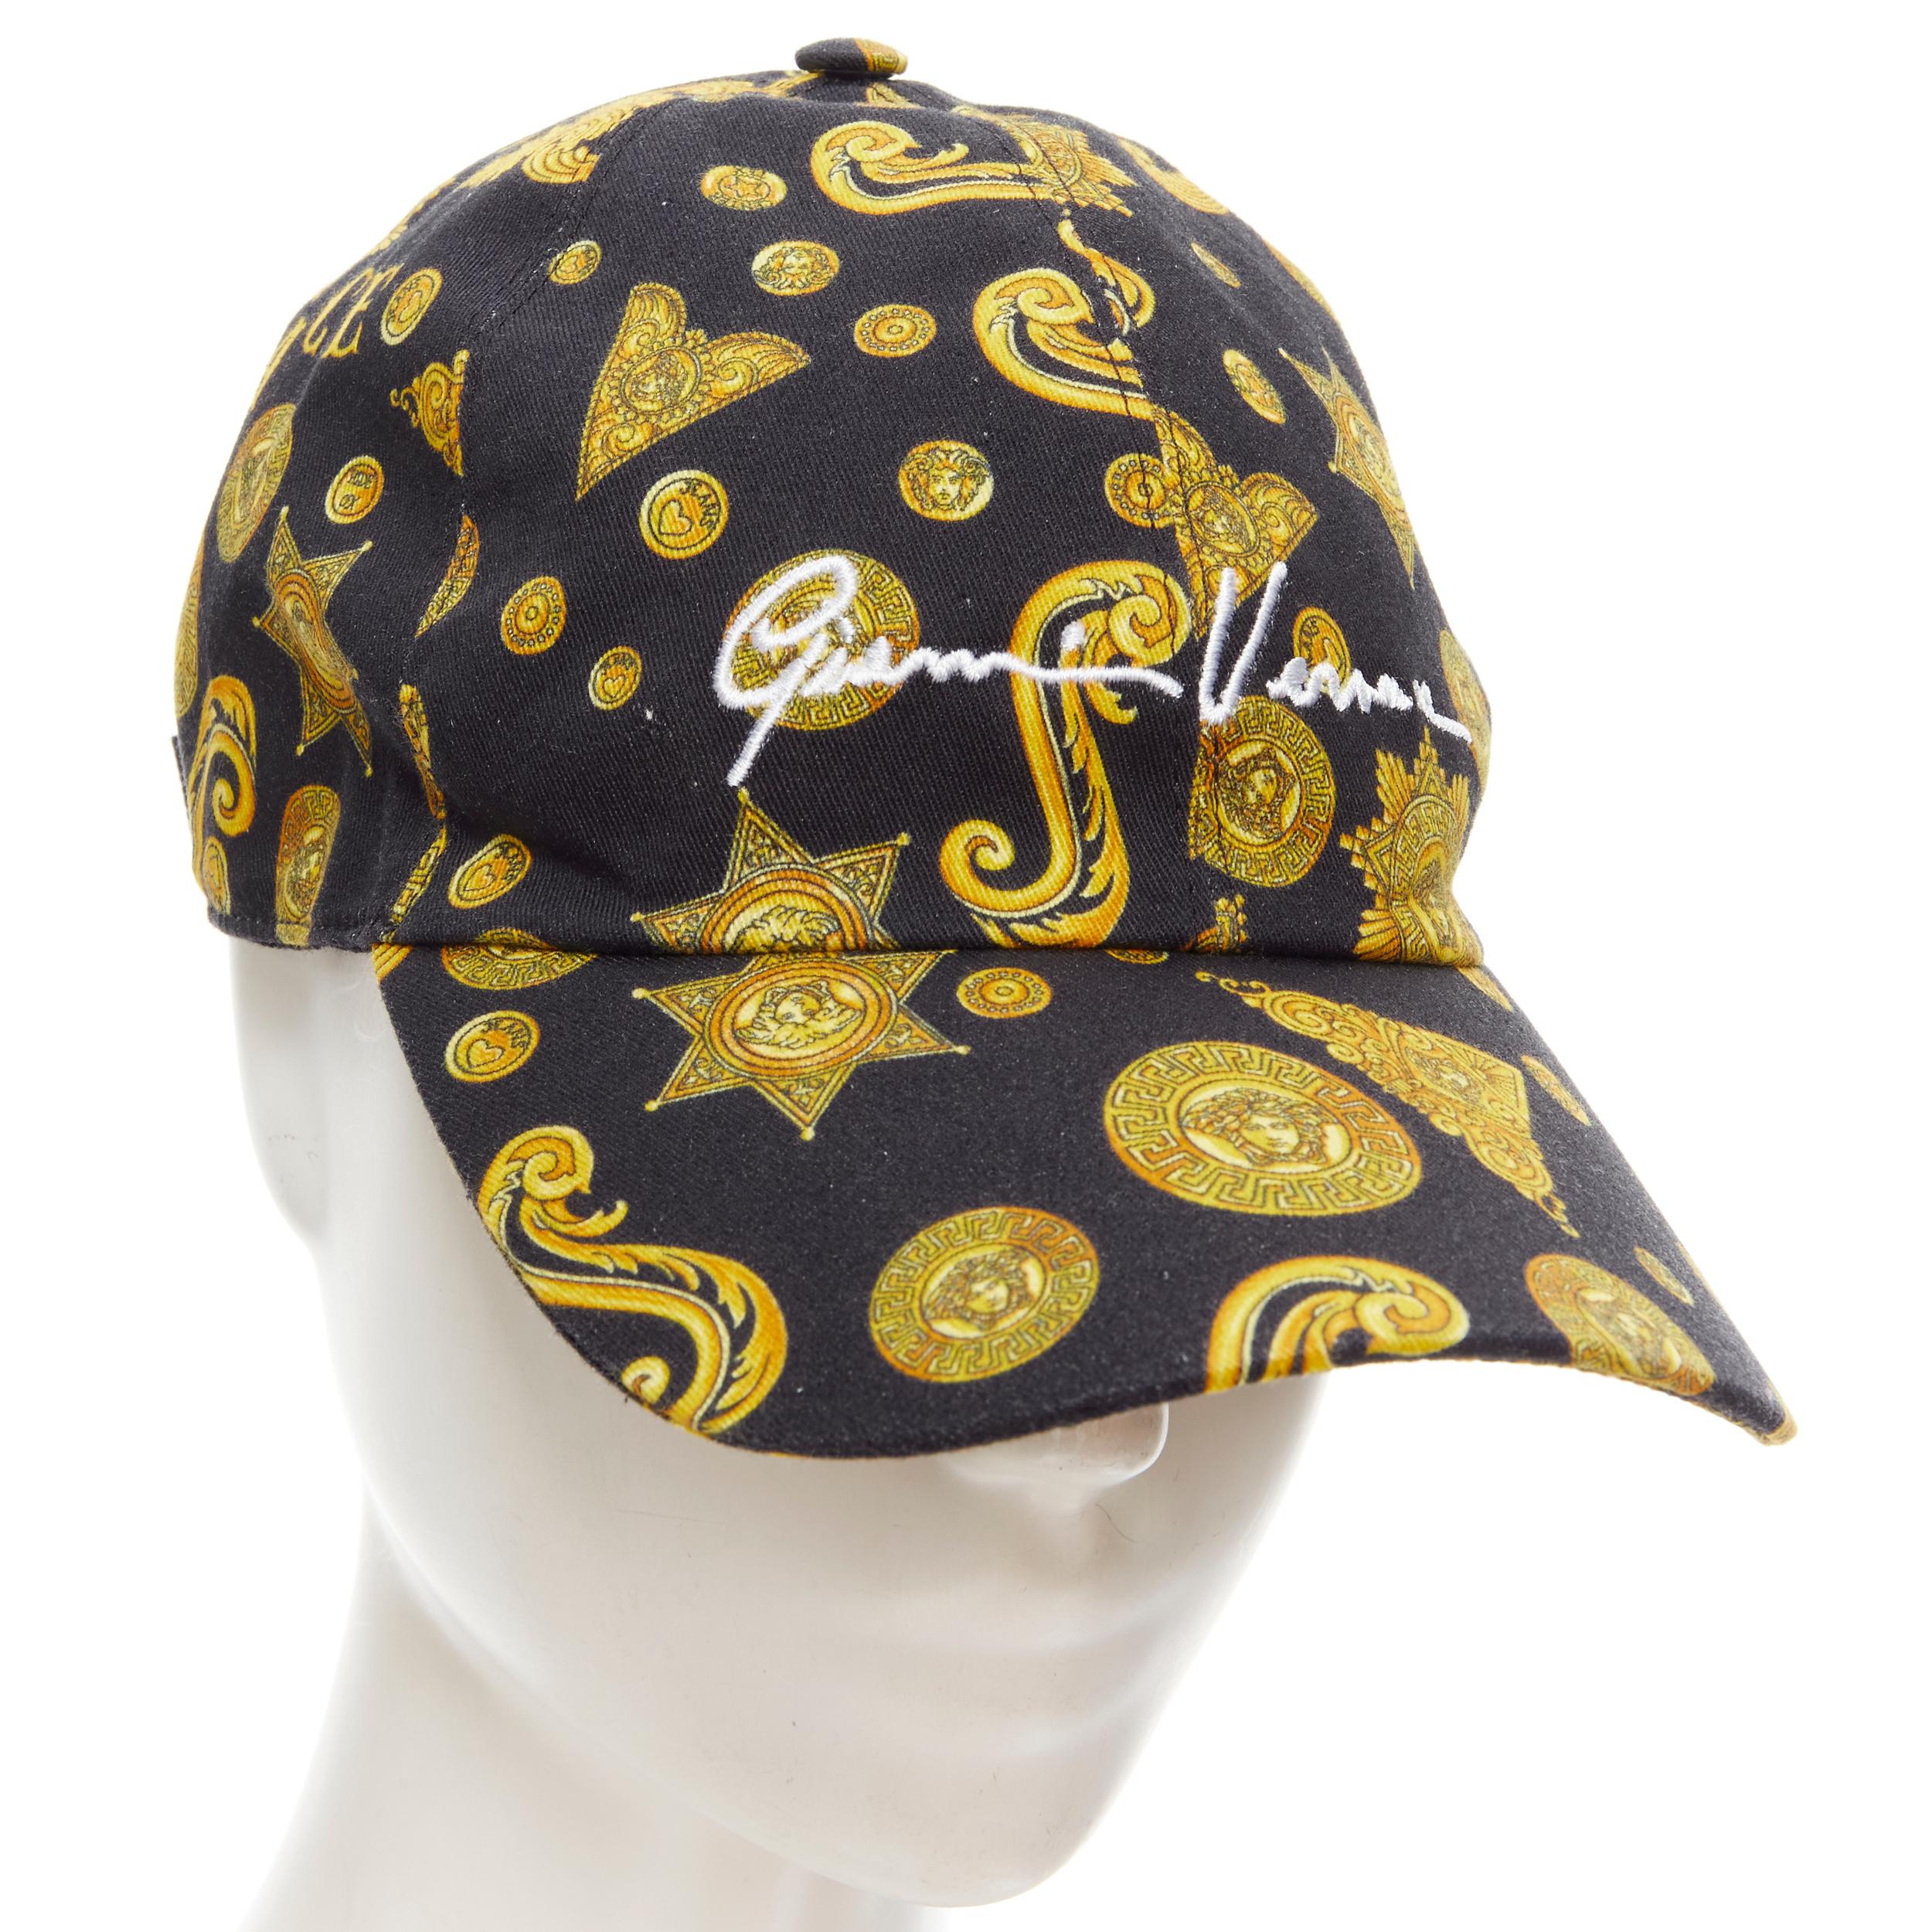 new VERSACE Rodeo Barocco black gold Medusa logo print dad cap 58cm M 7 1/4 
Reference: TGAS/C00215 
Brand: Versace 
Designer: Donatella Versace 
Collection: Rodeo Barocco 
Material: Cotton 
Color: Black 
Pattern: Medusa Coin 
Closure: Buckle 
Extra